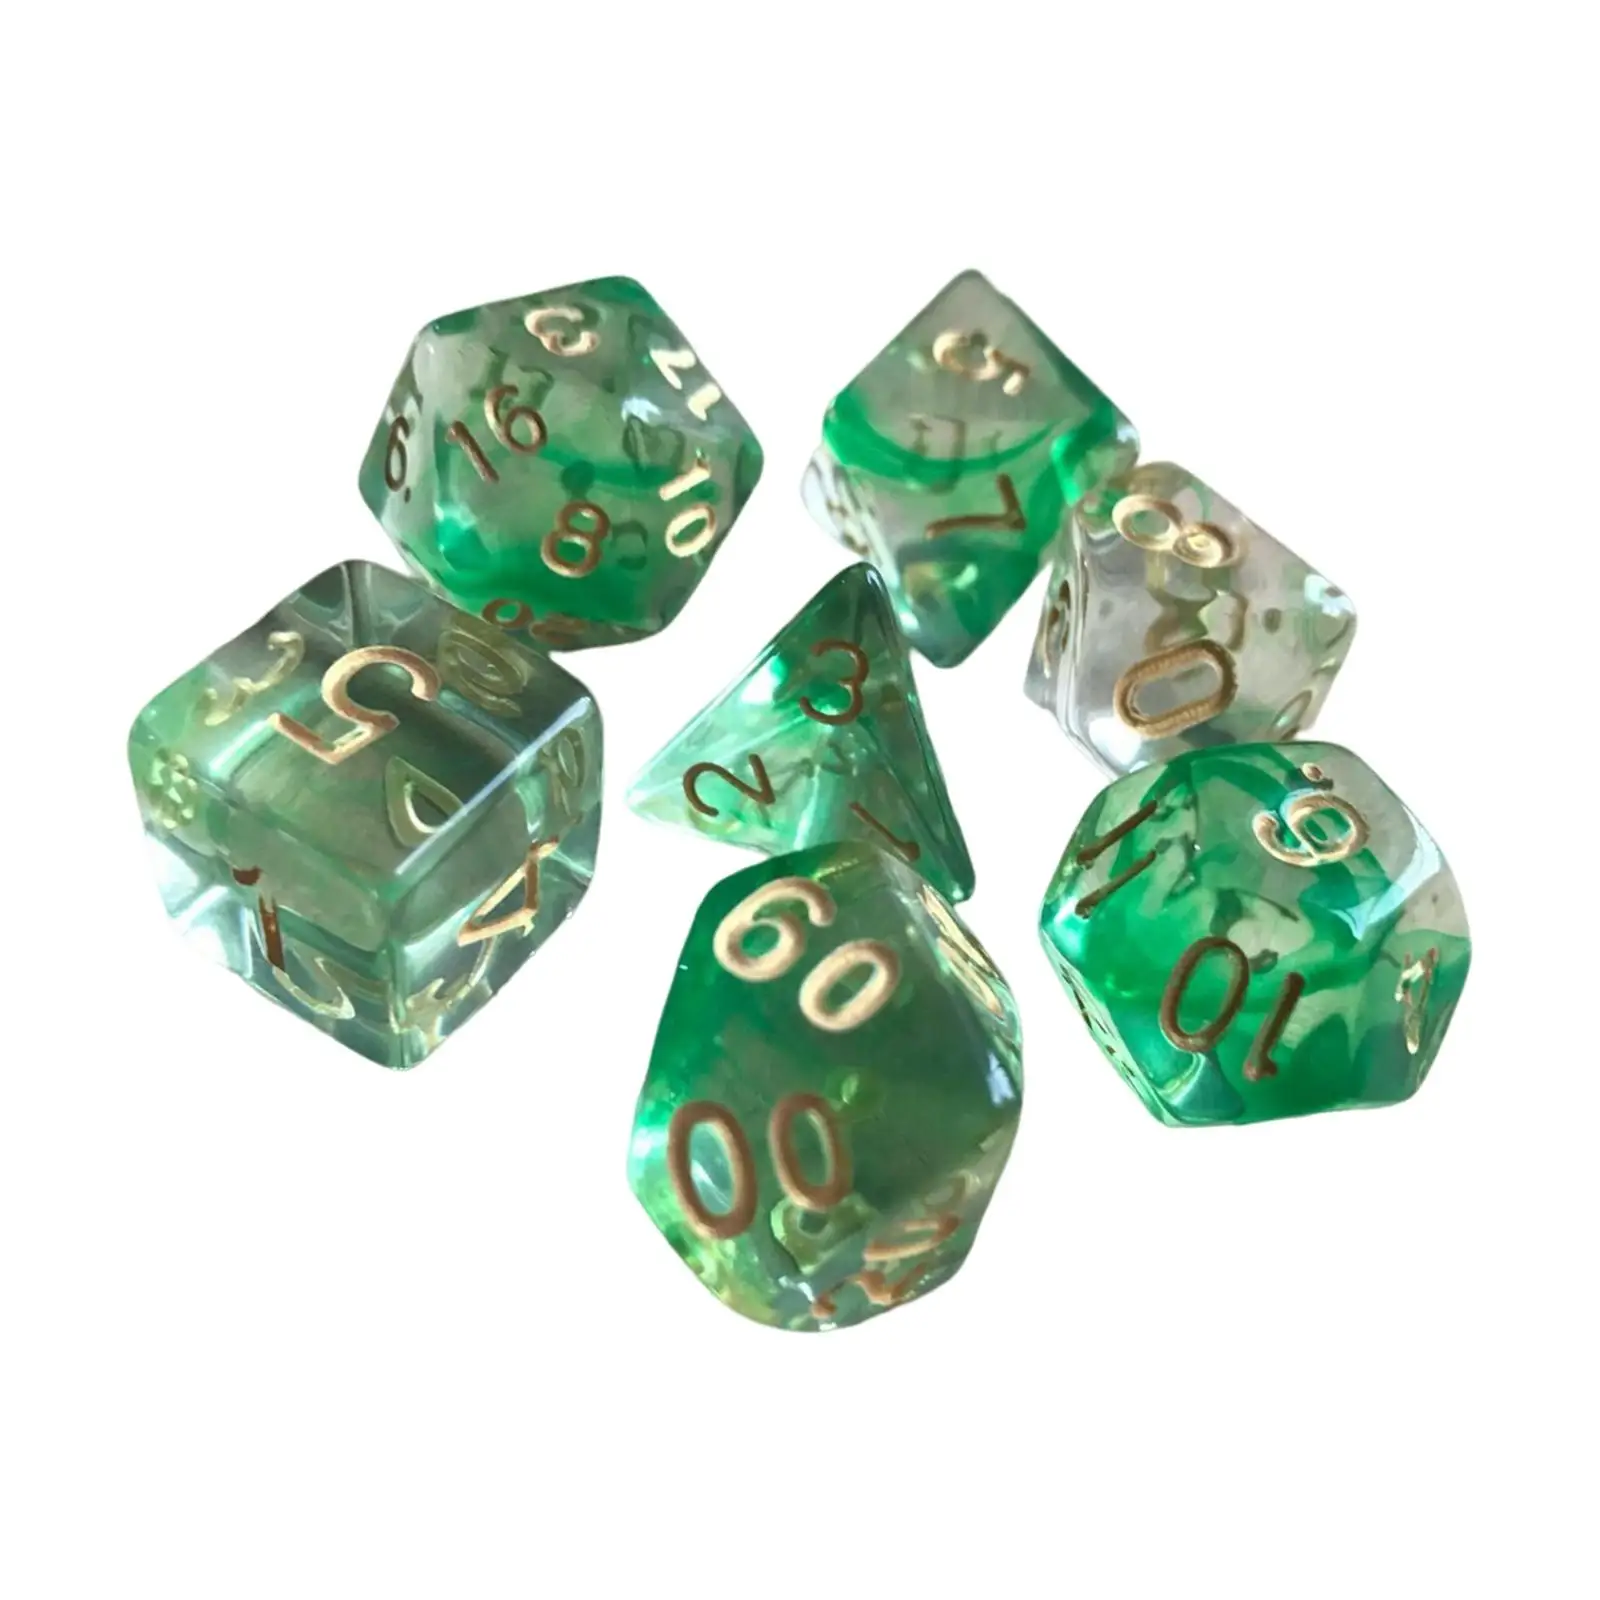 7x Acrylic Polyhedral   Game for  Game Table Board Math Teaching